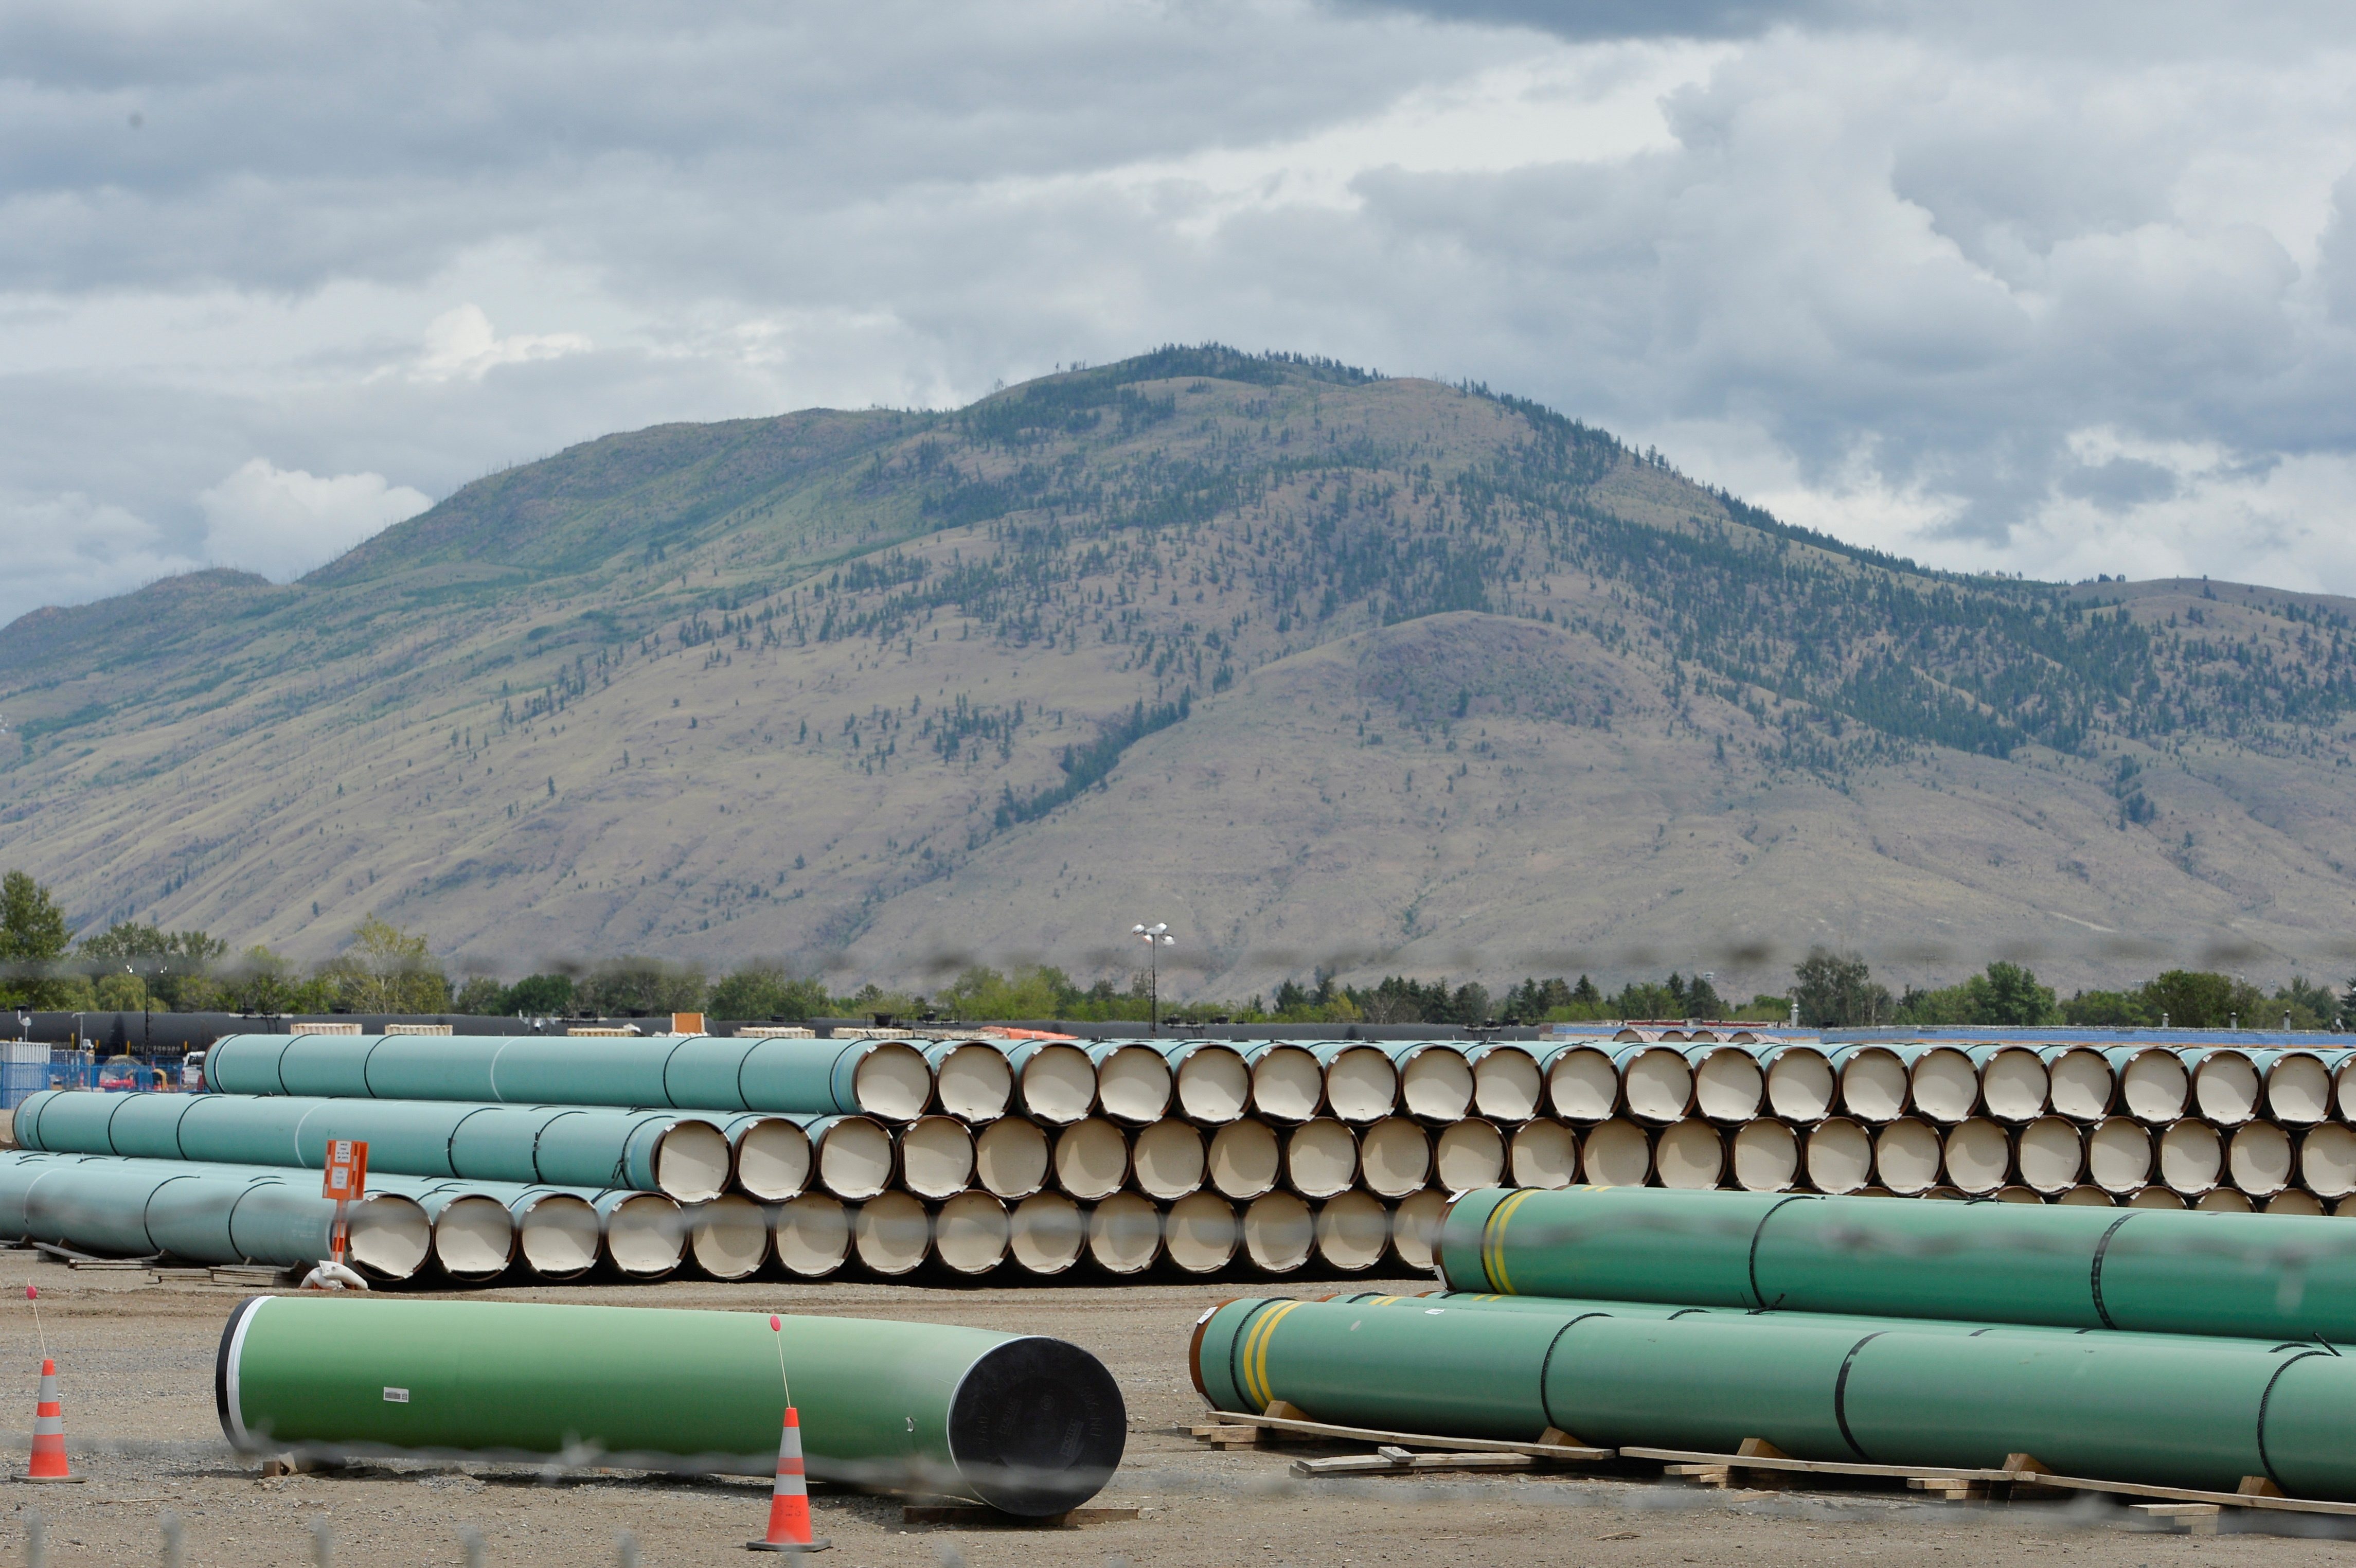 A pipe yard servicing government-owned oil pipeline operator Trans Mountain is seen in Kamloops, British Columbia, Canada June 7, 2021. REUTERS/Jennifer Gauthier